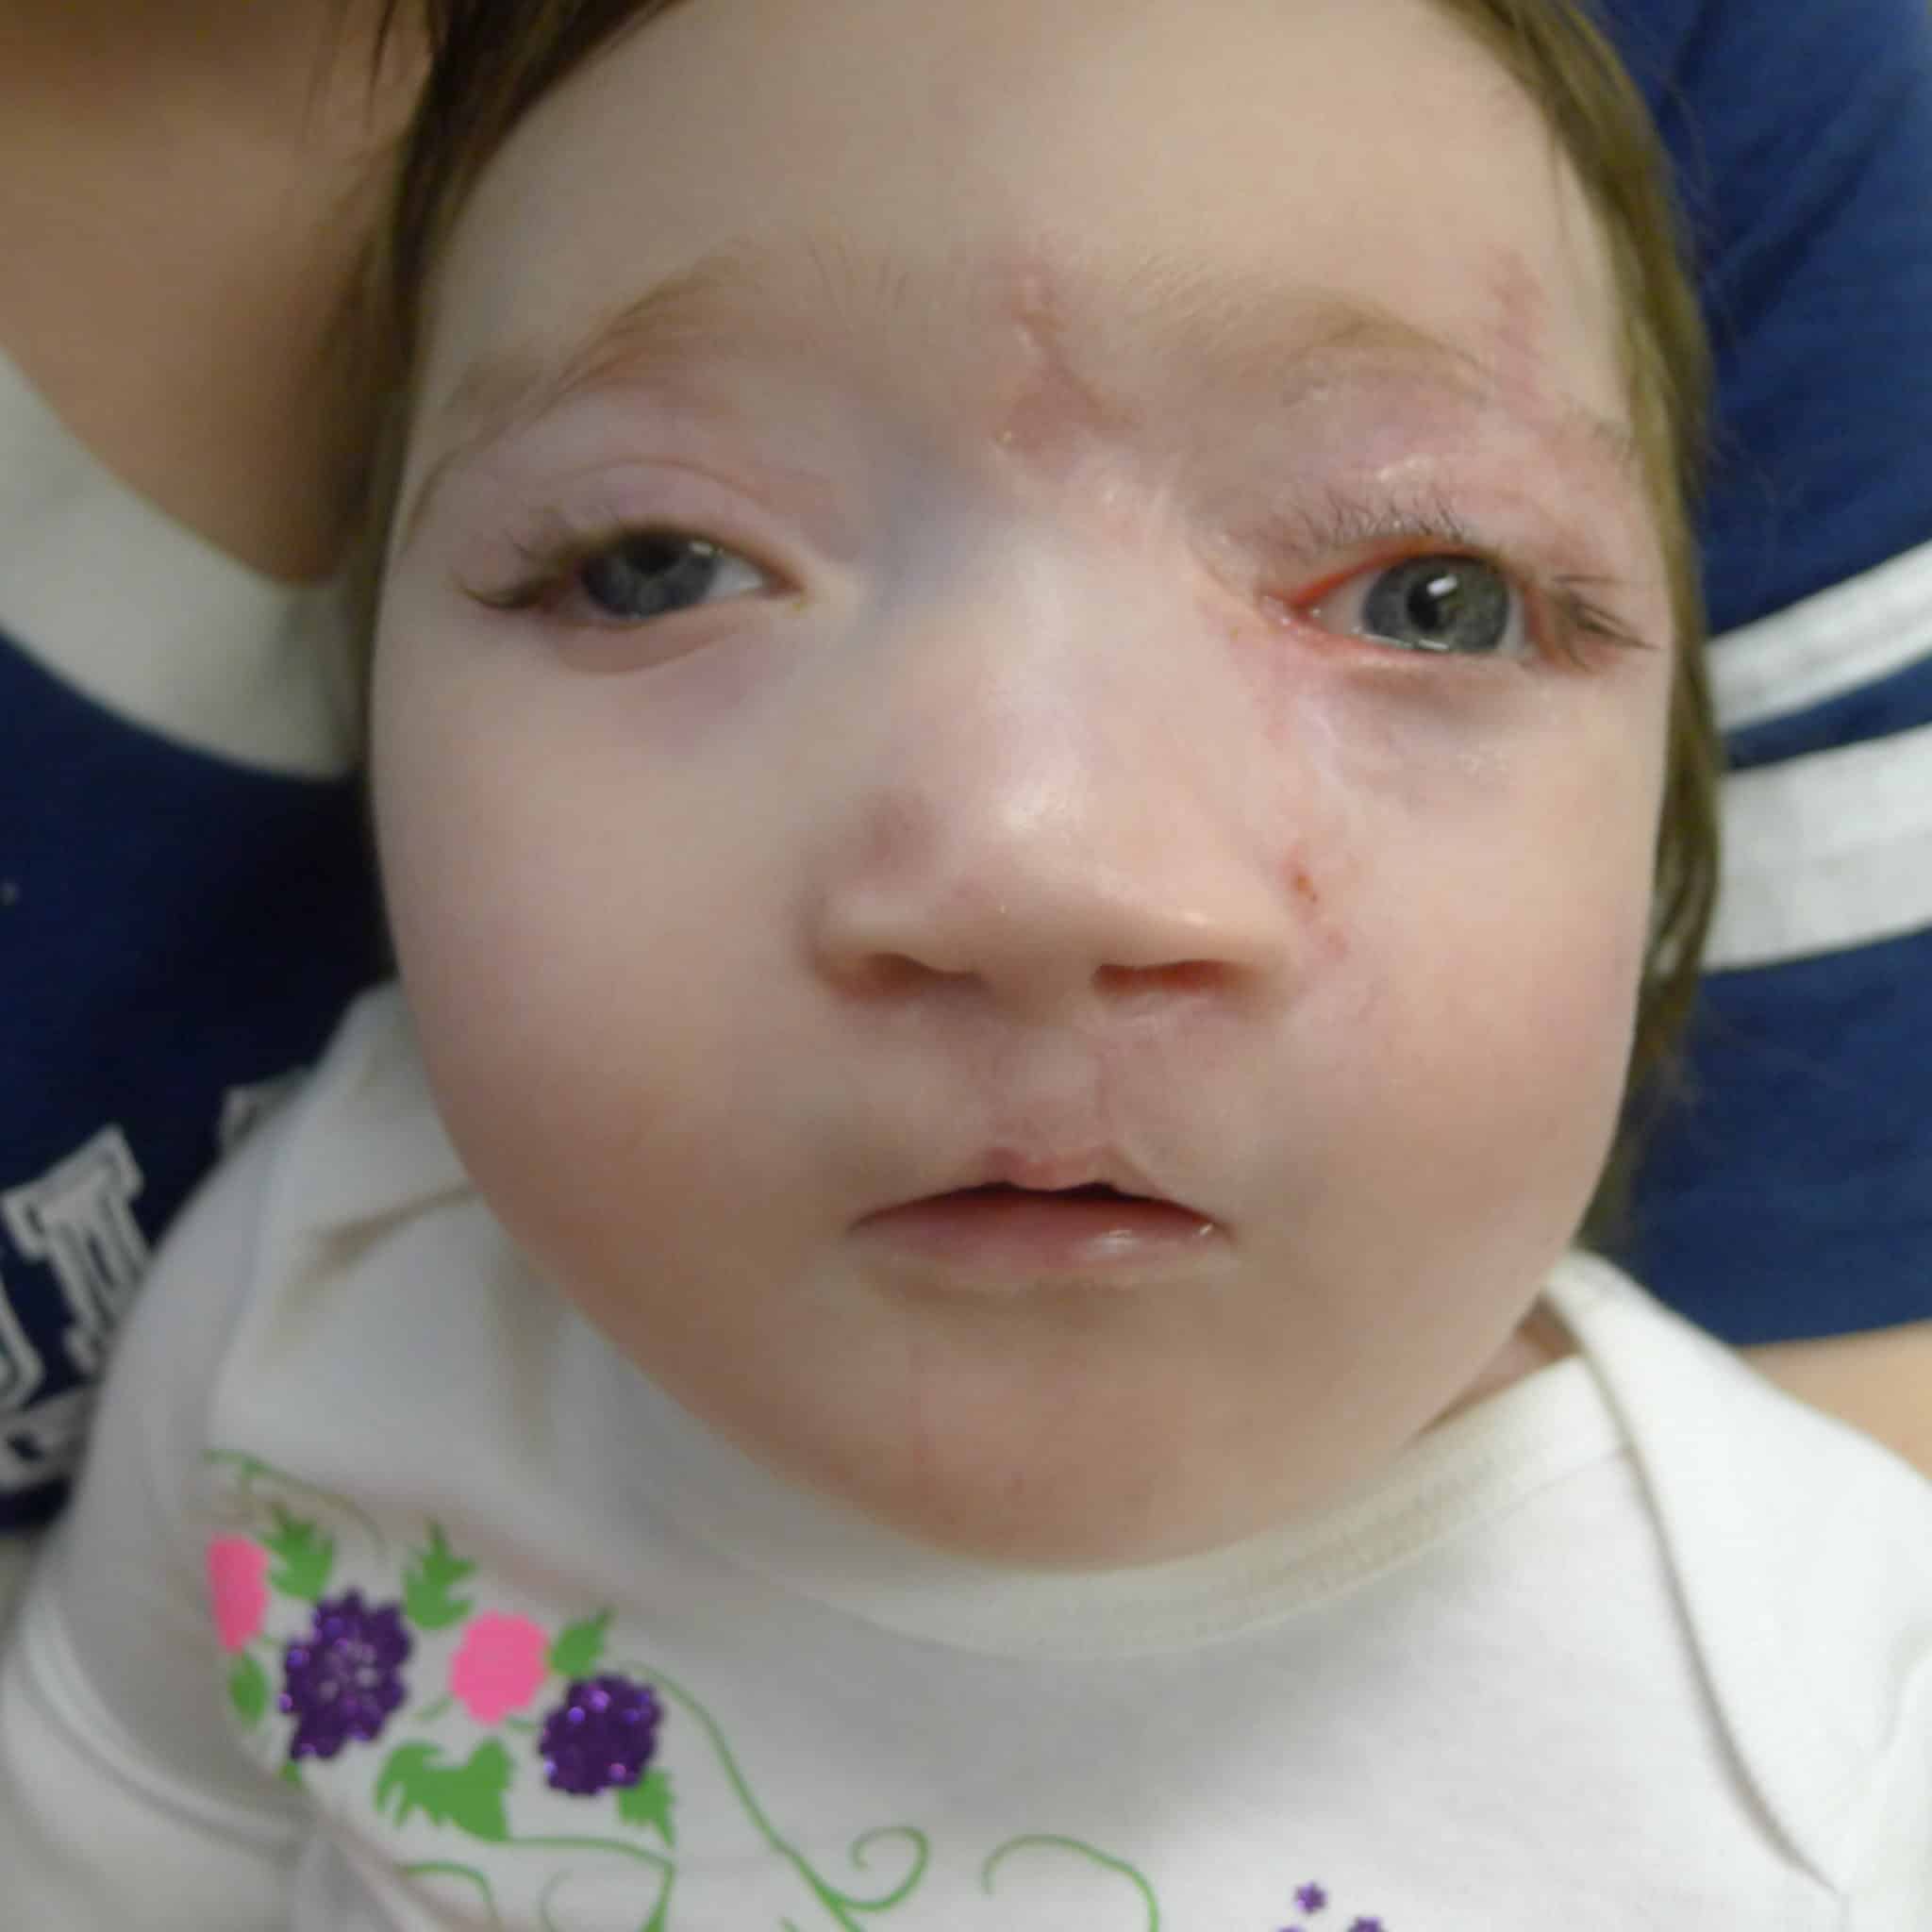 Patient 1 at 6 months after surgery.